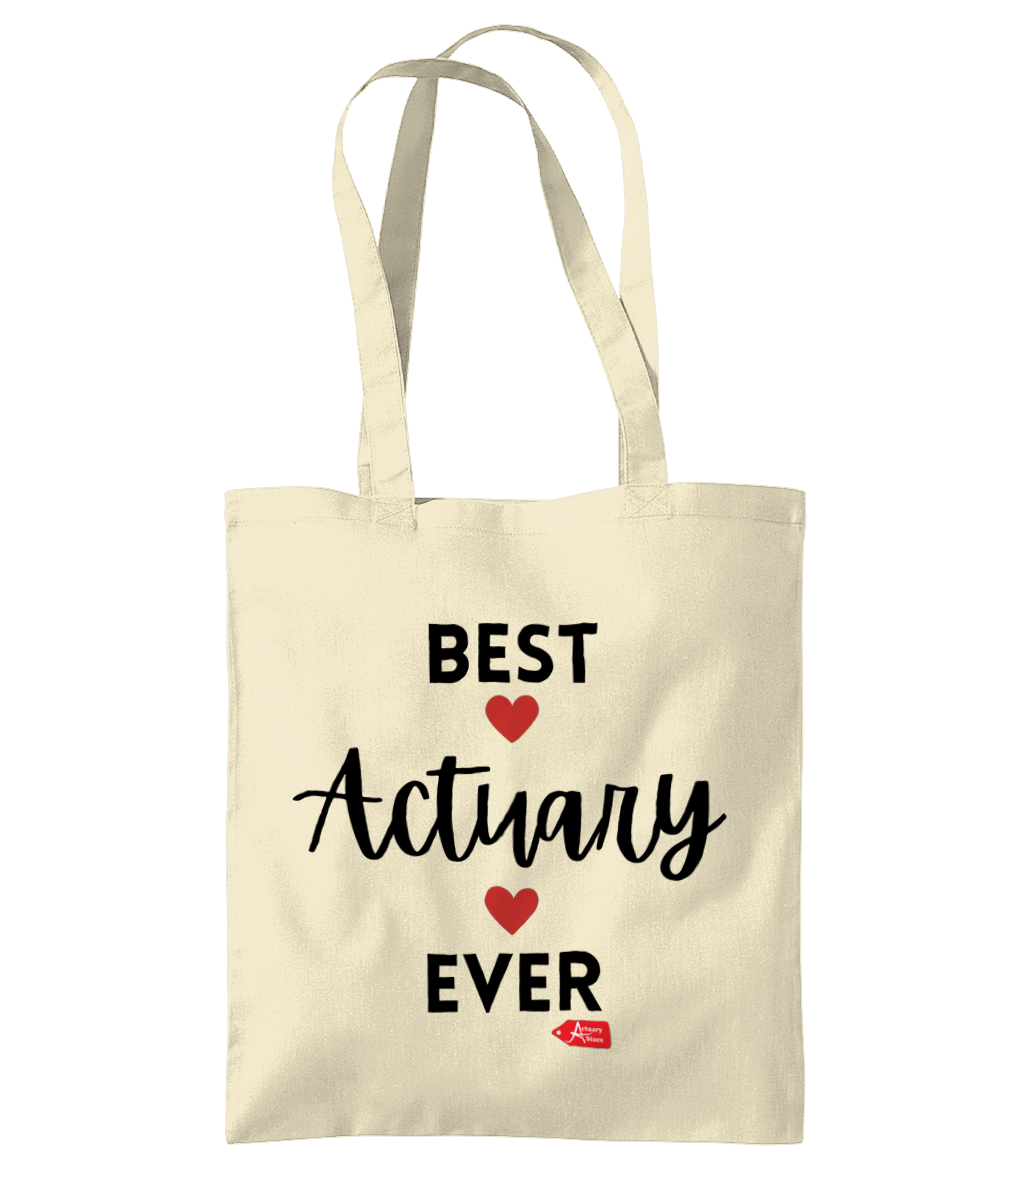 Tote Bag Best Actuary Ever Hearts